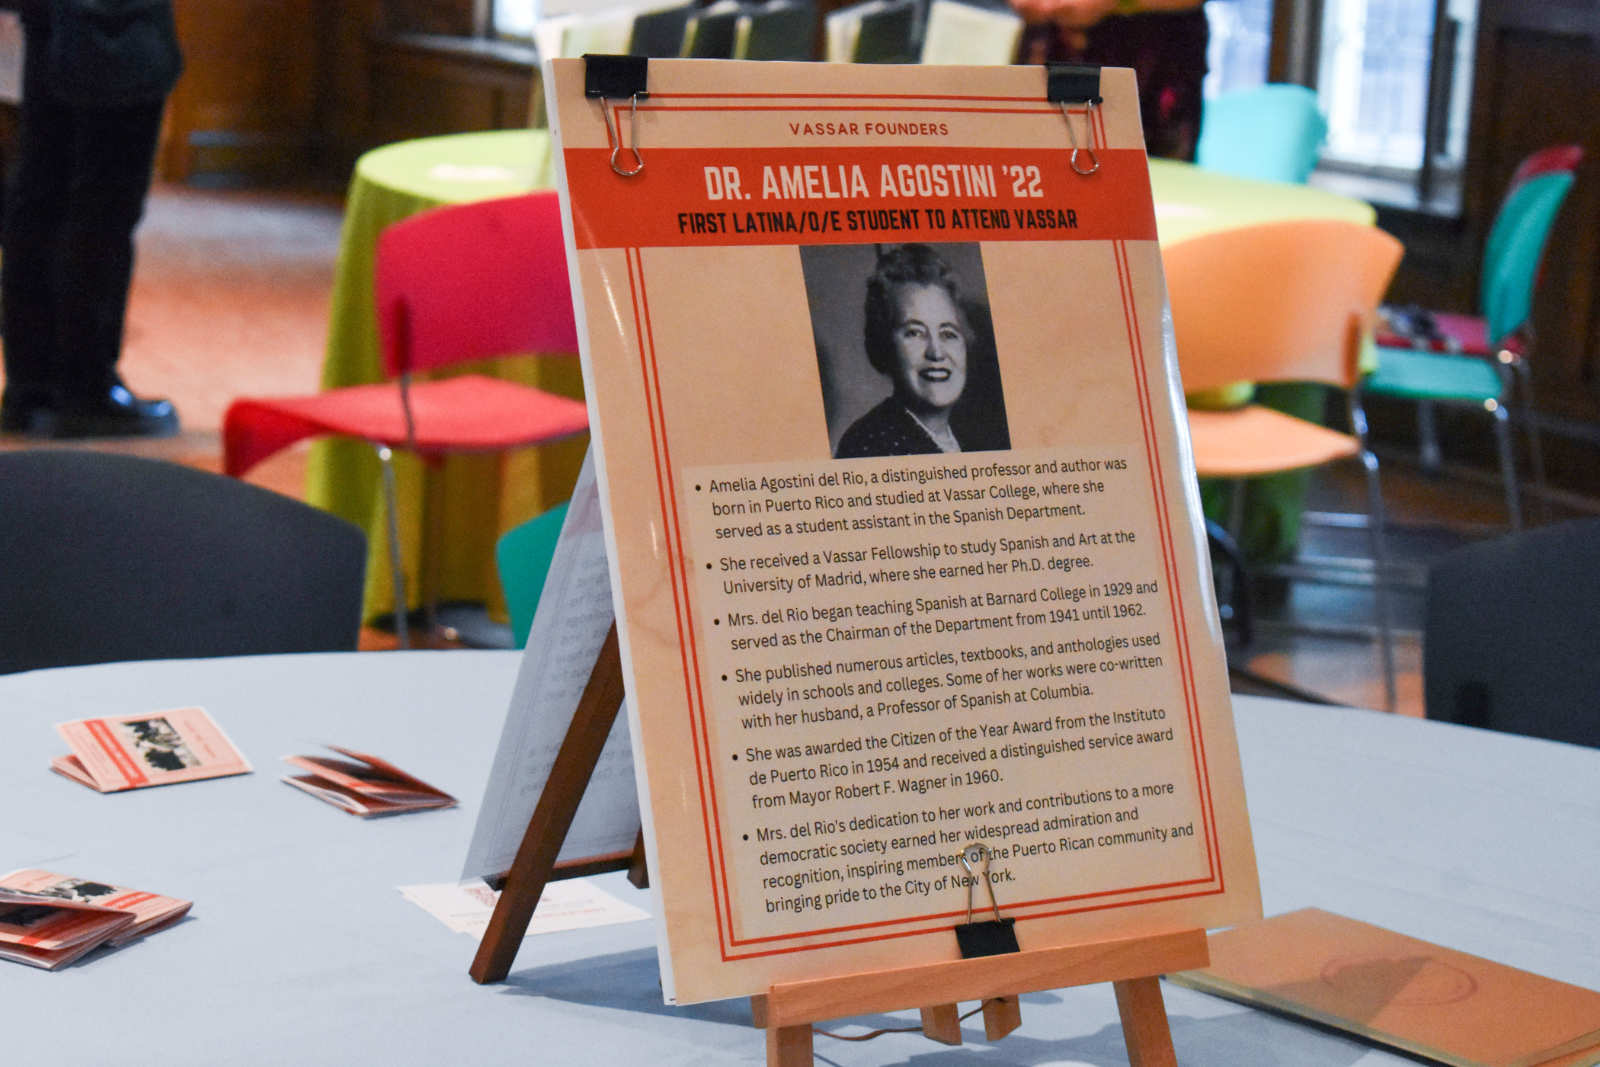 A poster placed on a table. The poster reads “Dr. Amelia Agostini ’22. First Latina/o/e Student to Attend Vassar.”